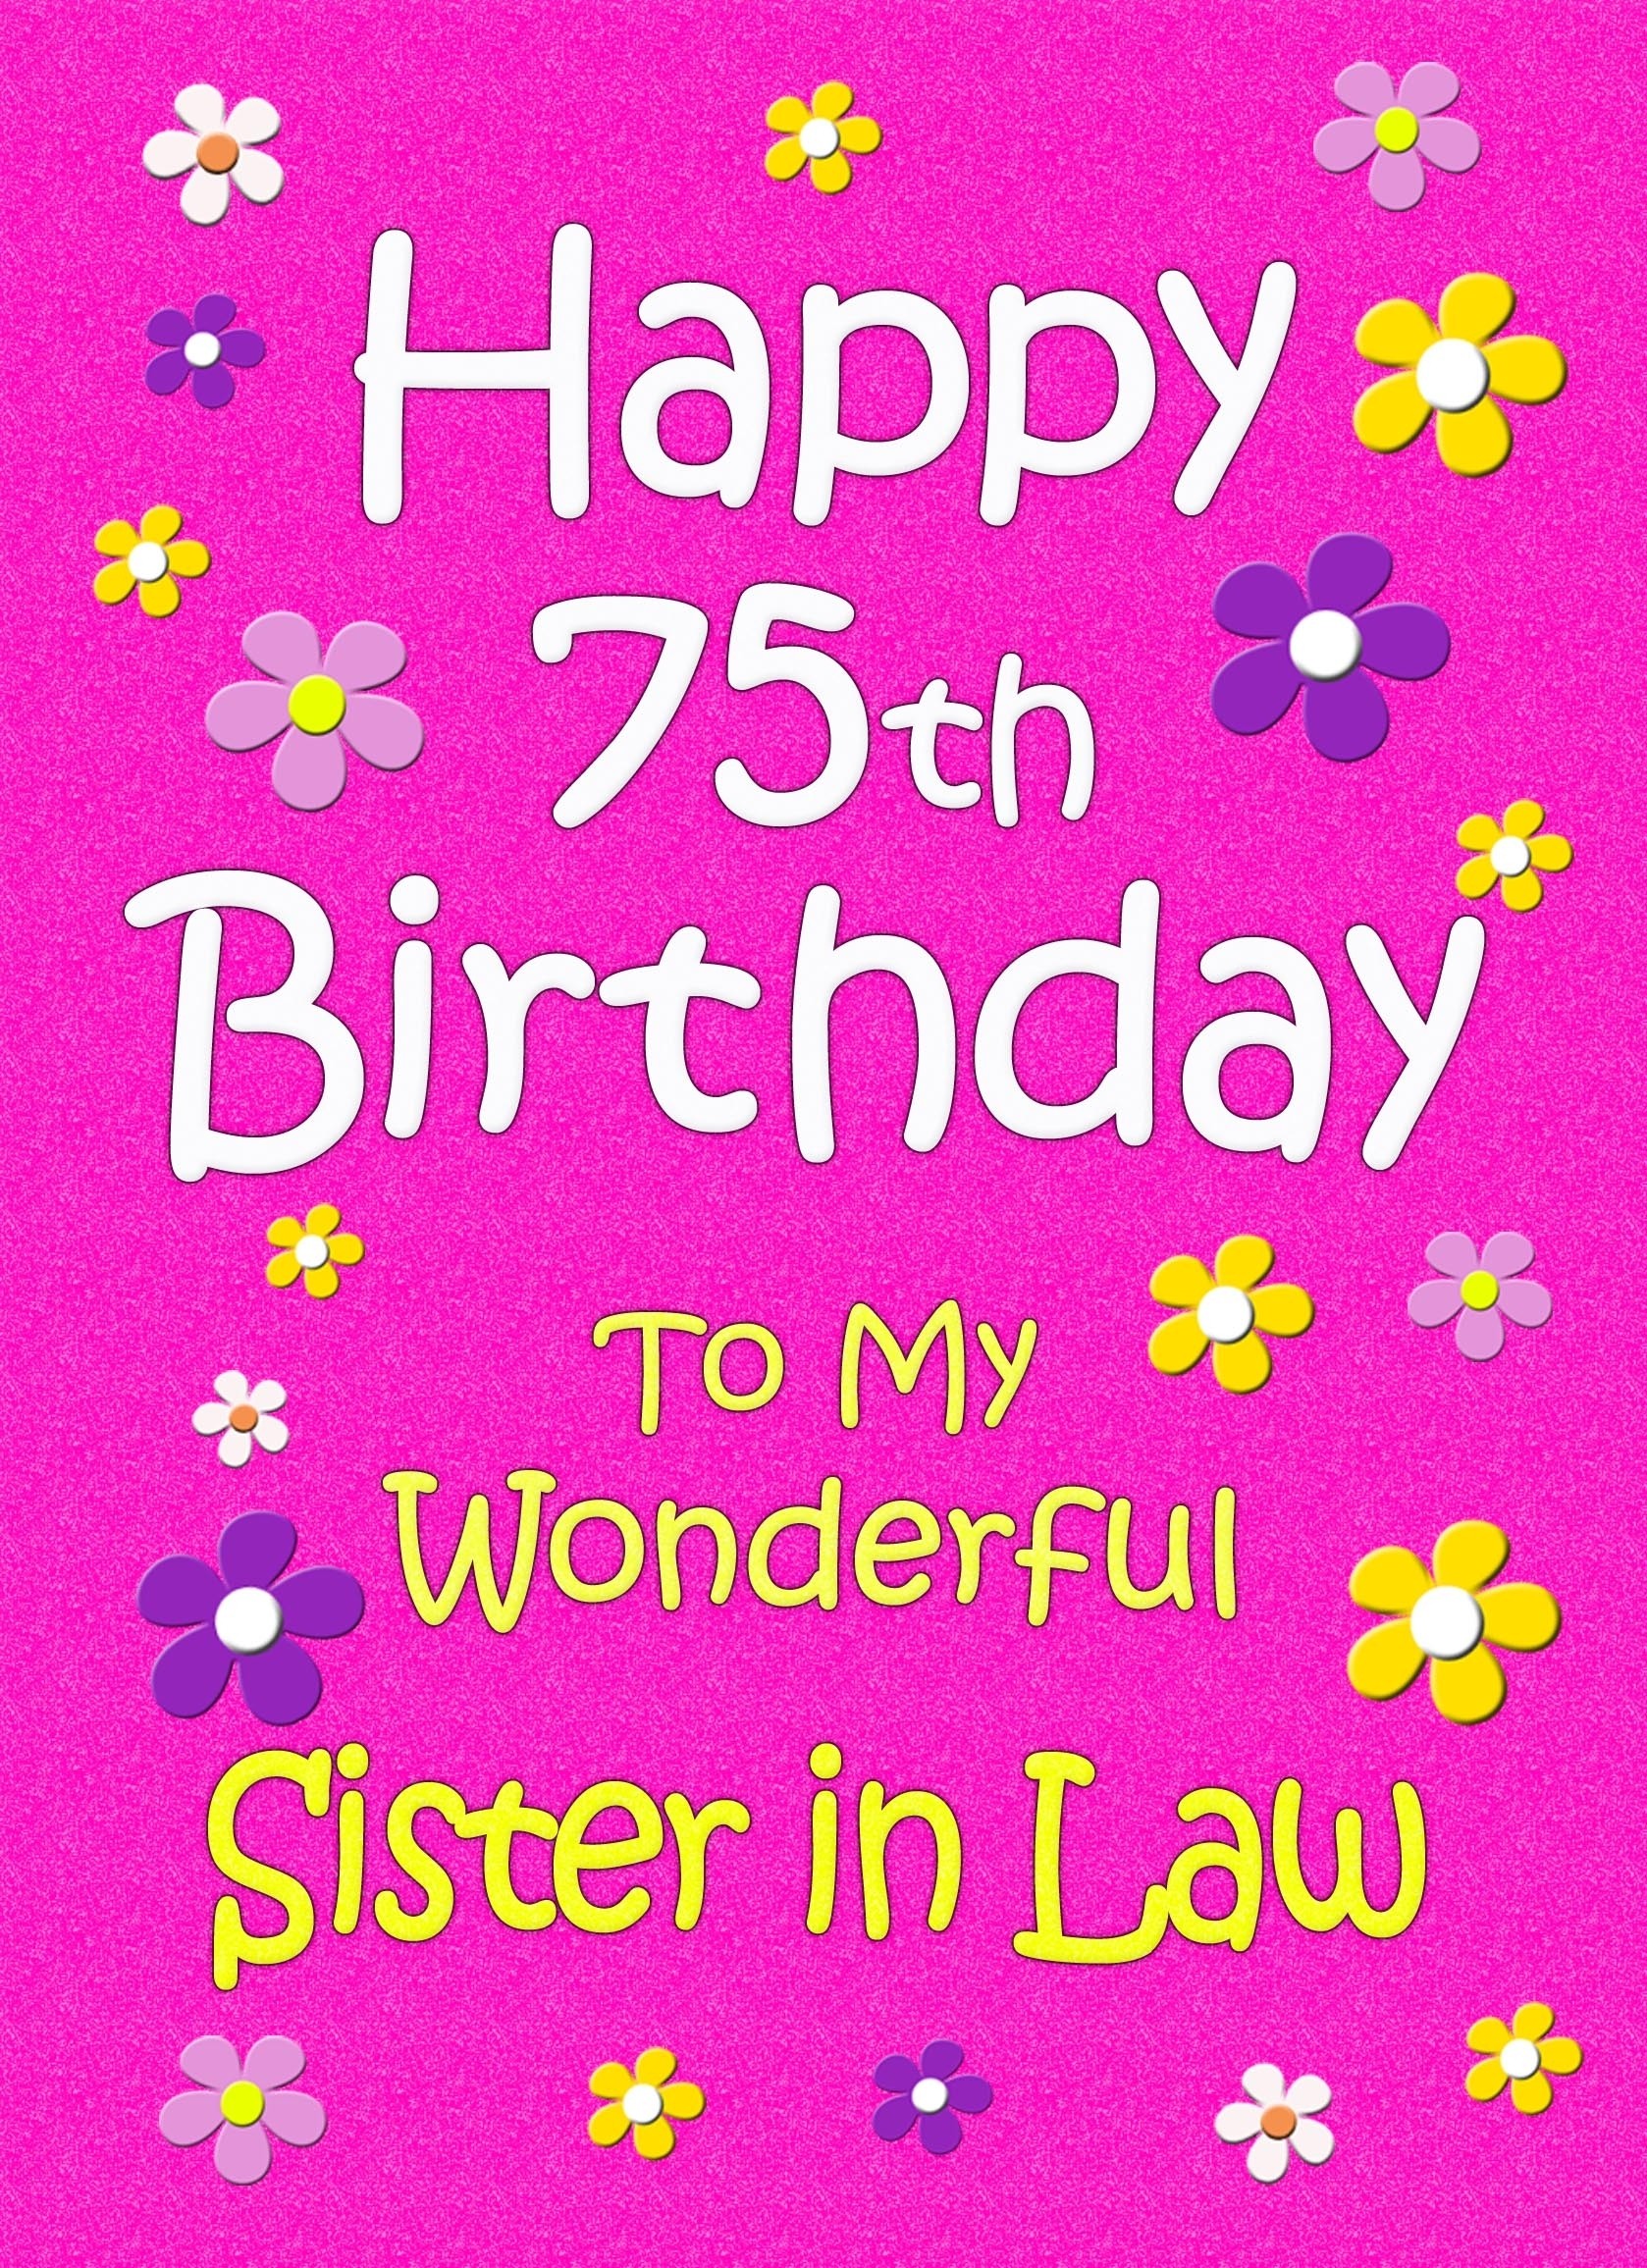 Sister in Law 75th Birthday Card (Pink)